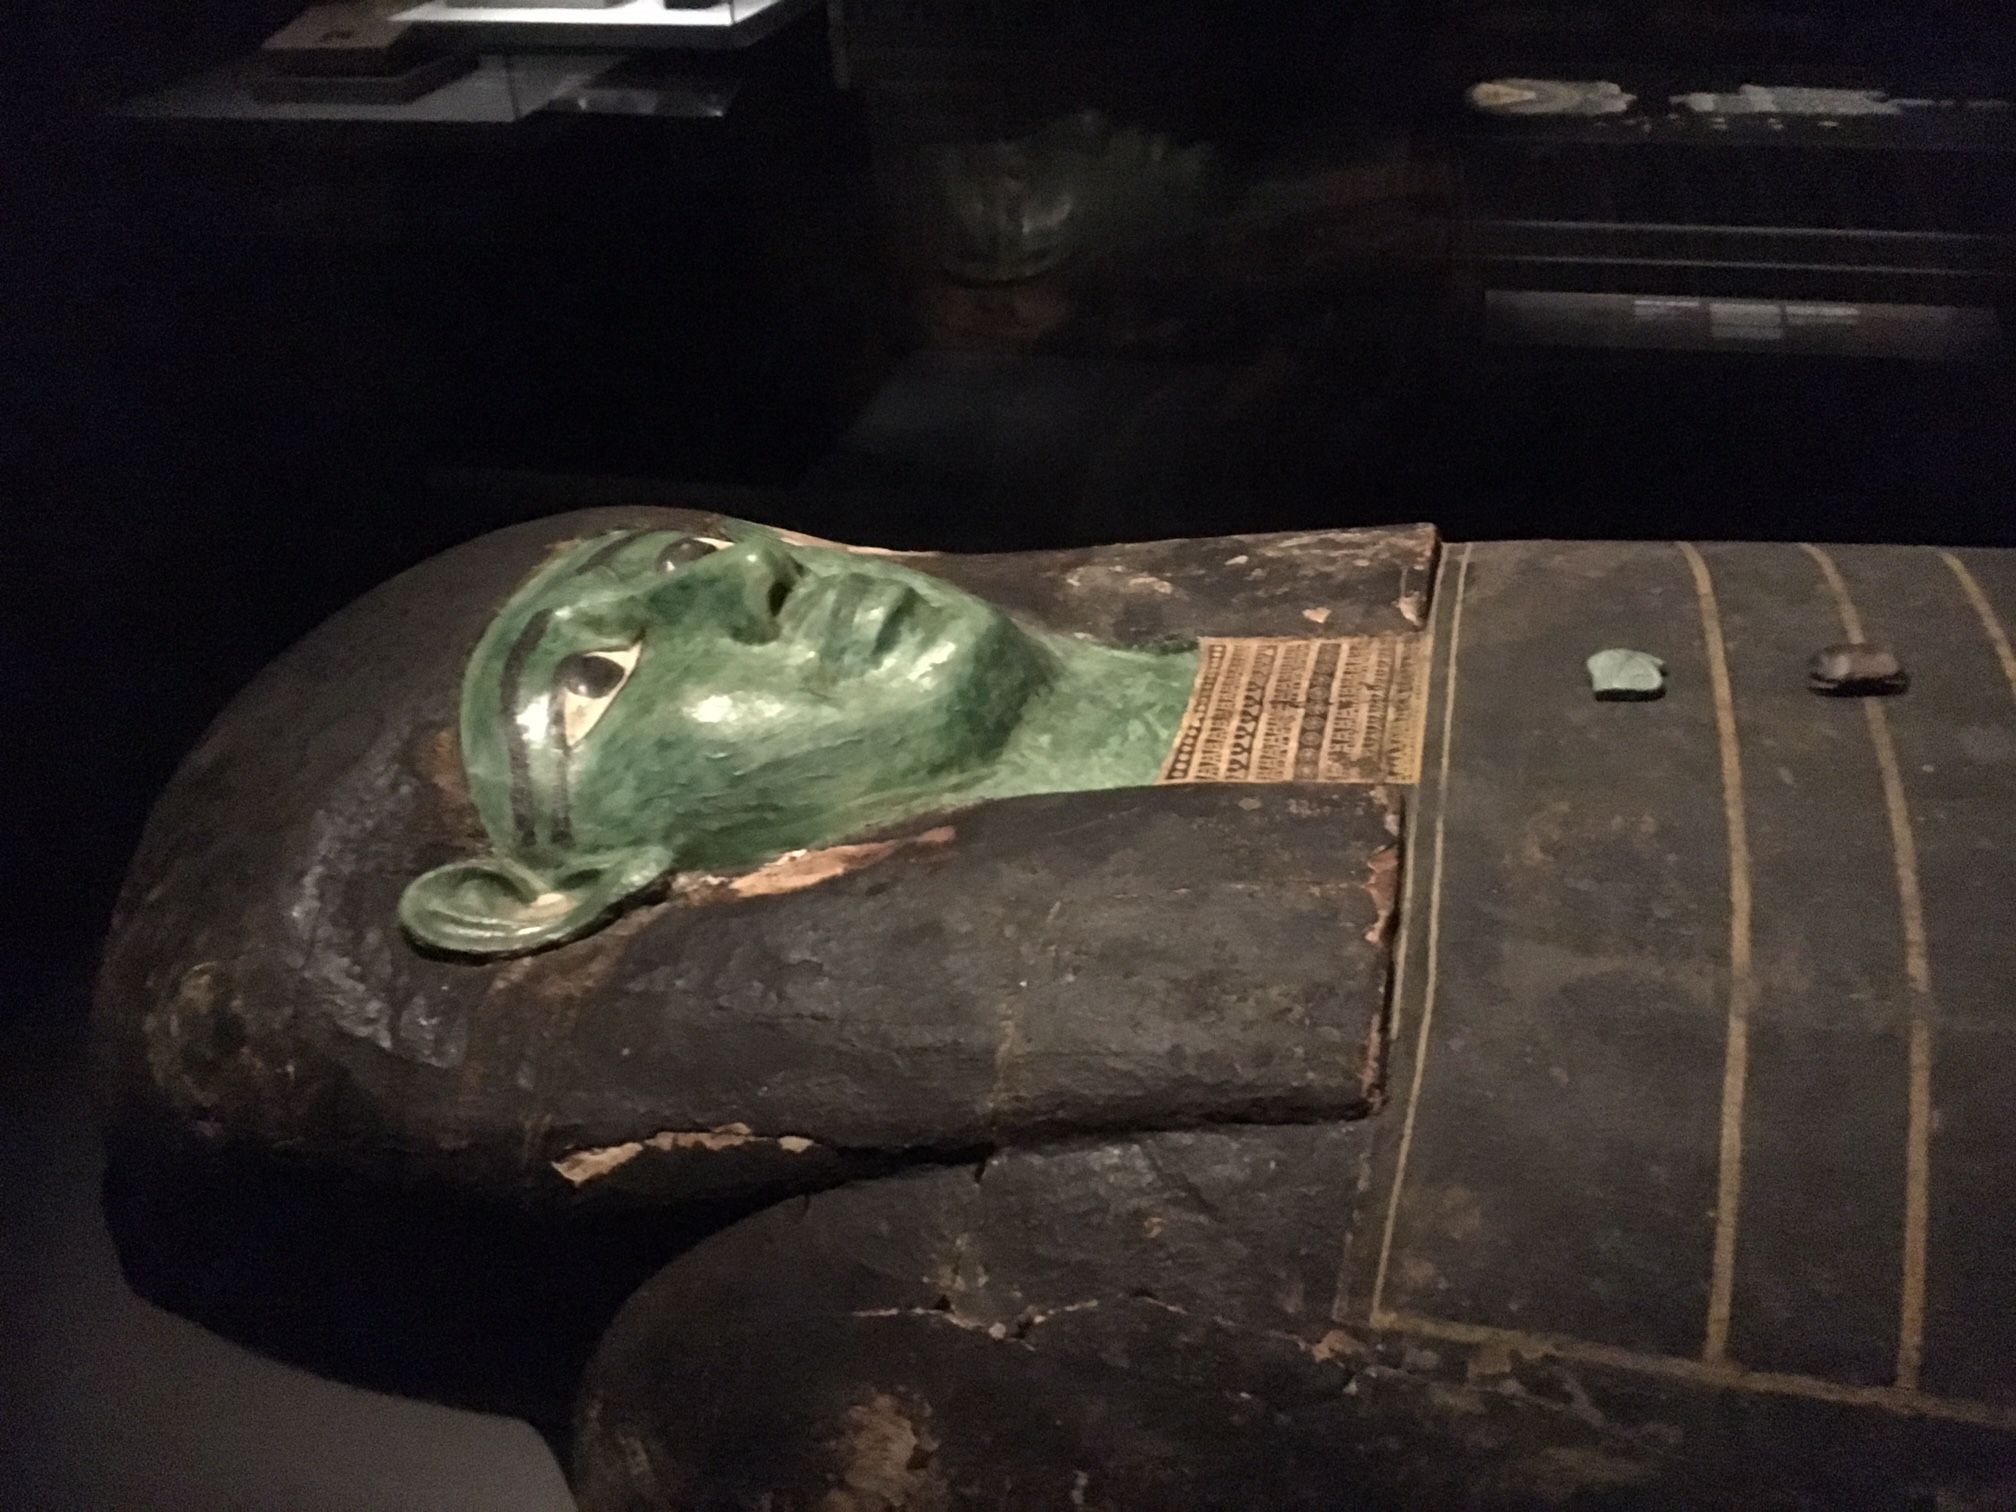 Giant coffin with malachite face, possibly from Herakleopolis Magna. Ptolemaic Period, 332–30 BC